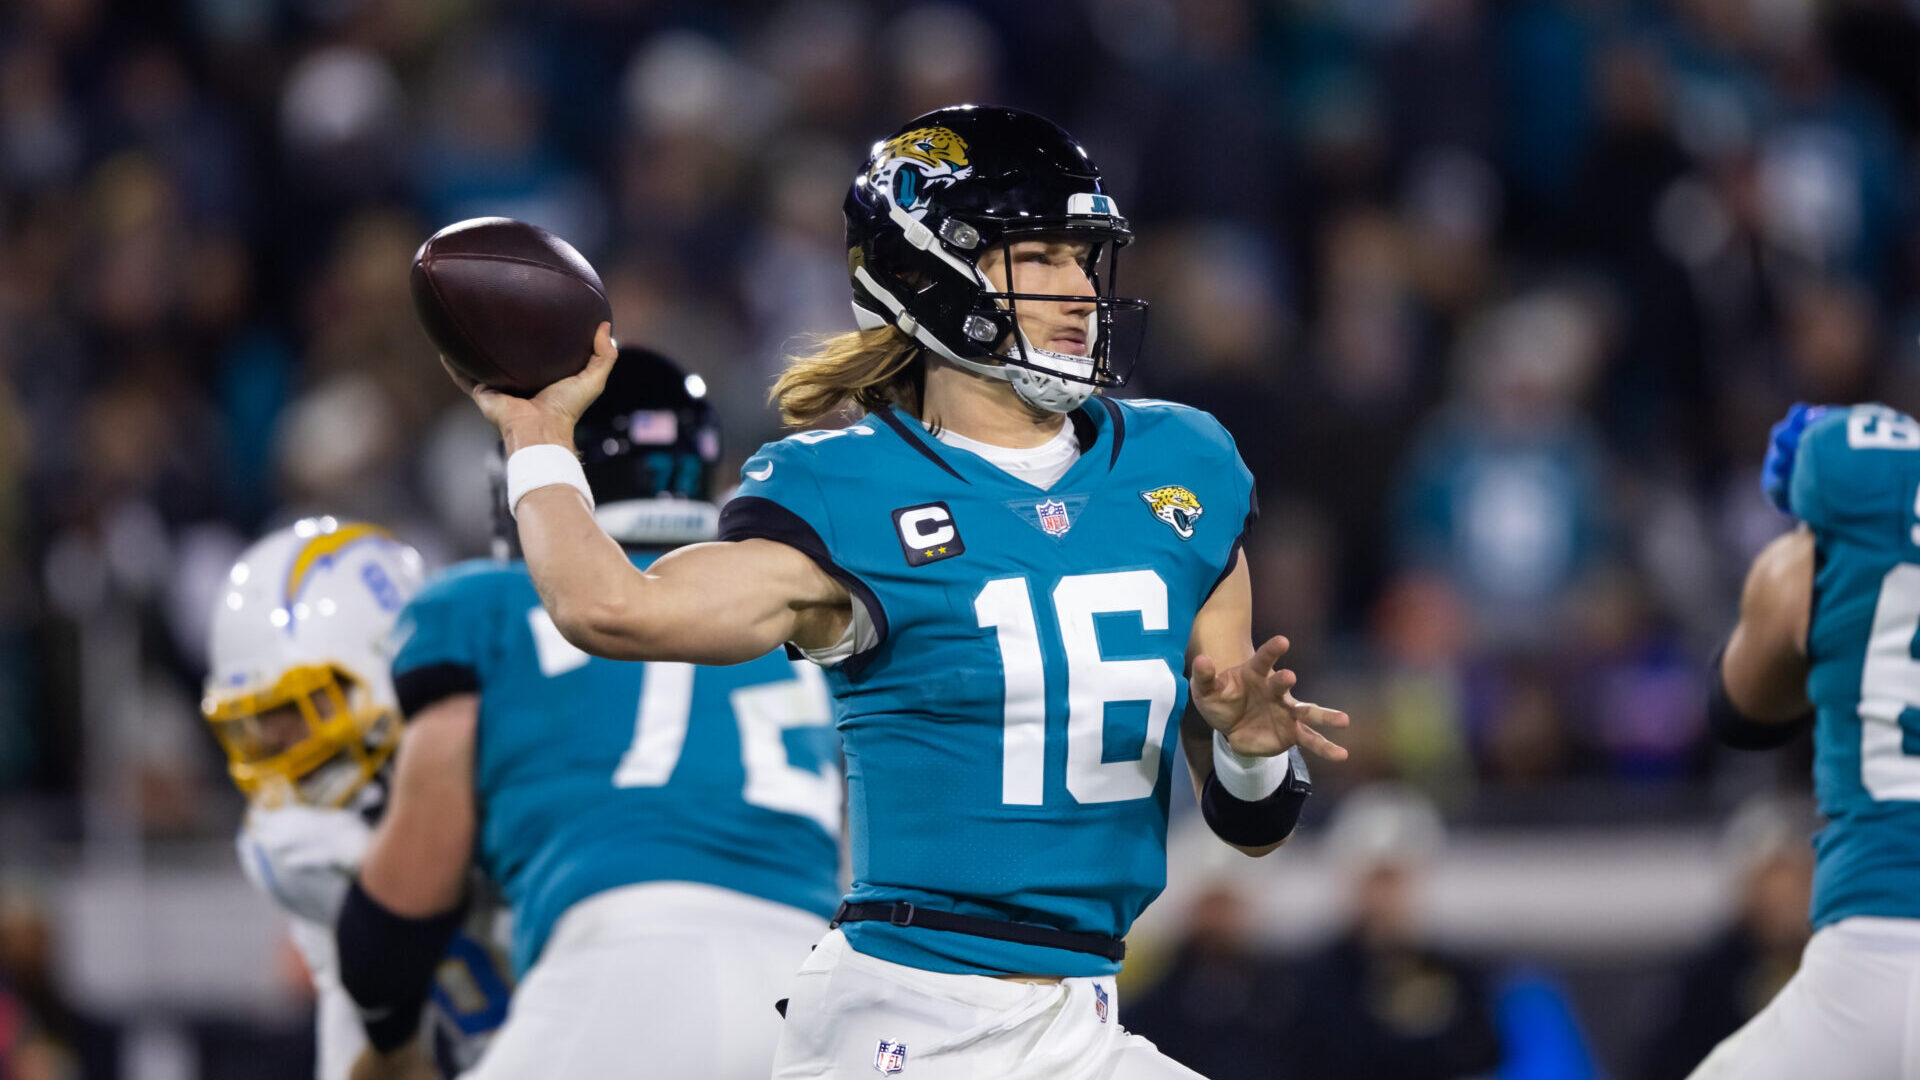 Jacksonville Jaguars quarterback Trevor Lawrence throwing the ball in his team's teal-and-white uniform